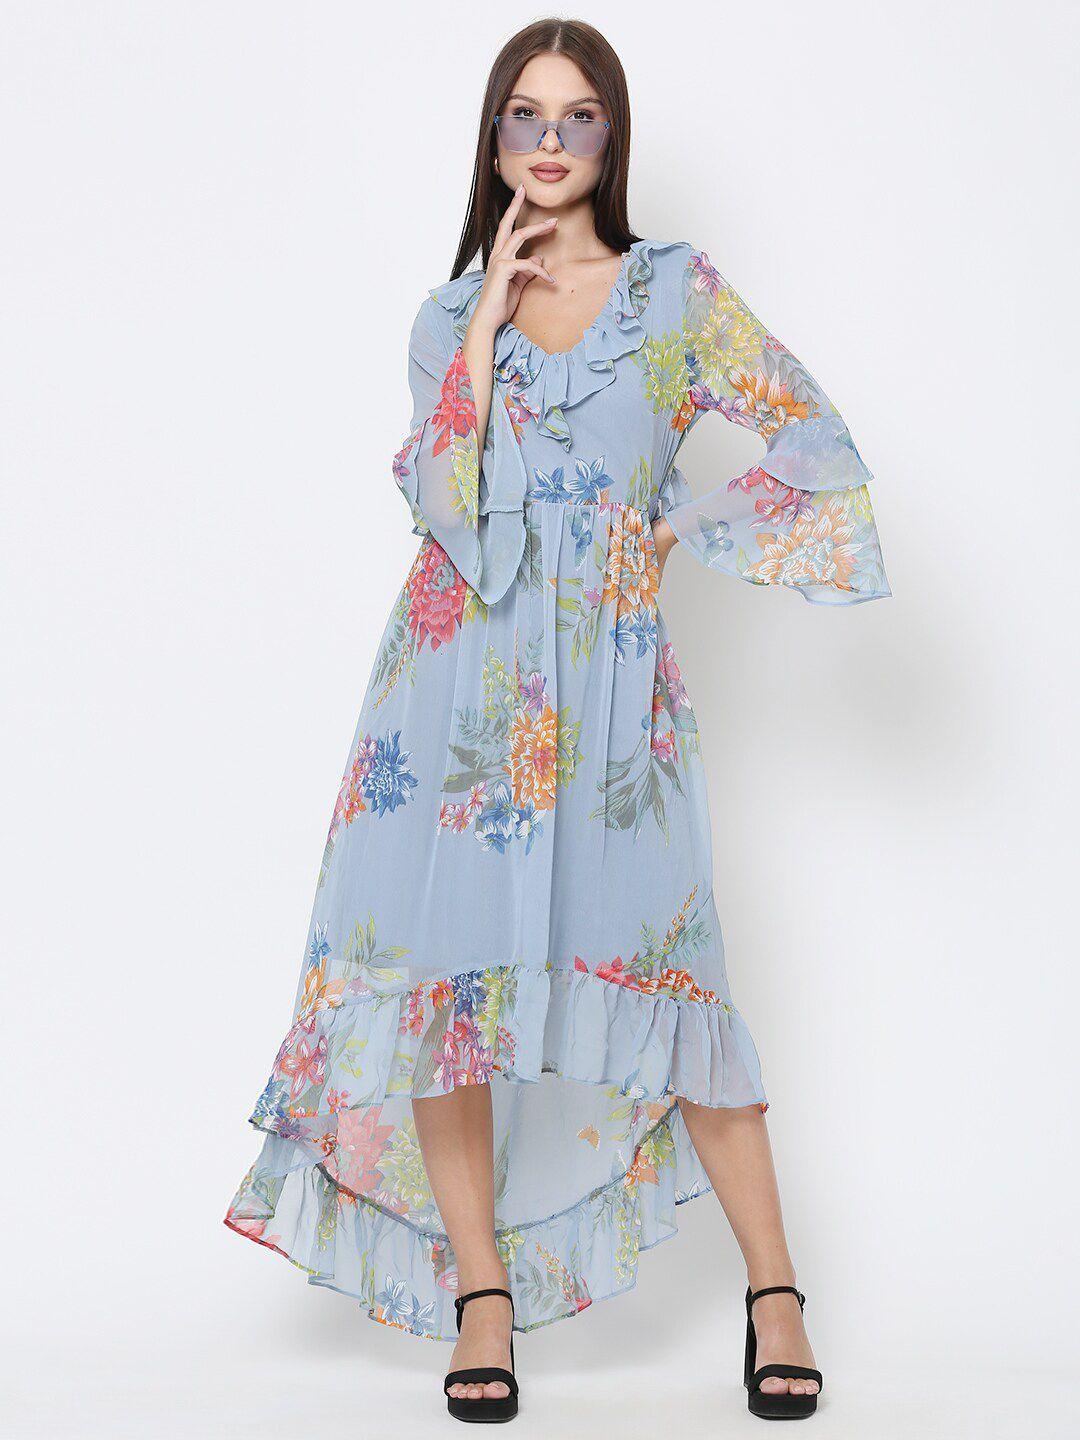 driro blue & yellow floral printed georgette a-line maxi dress